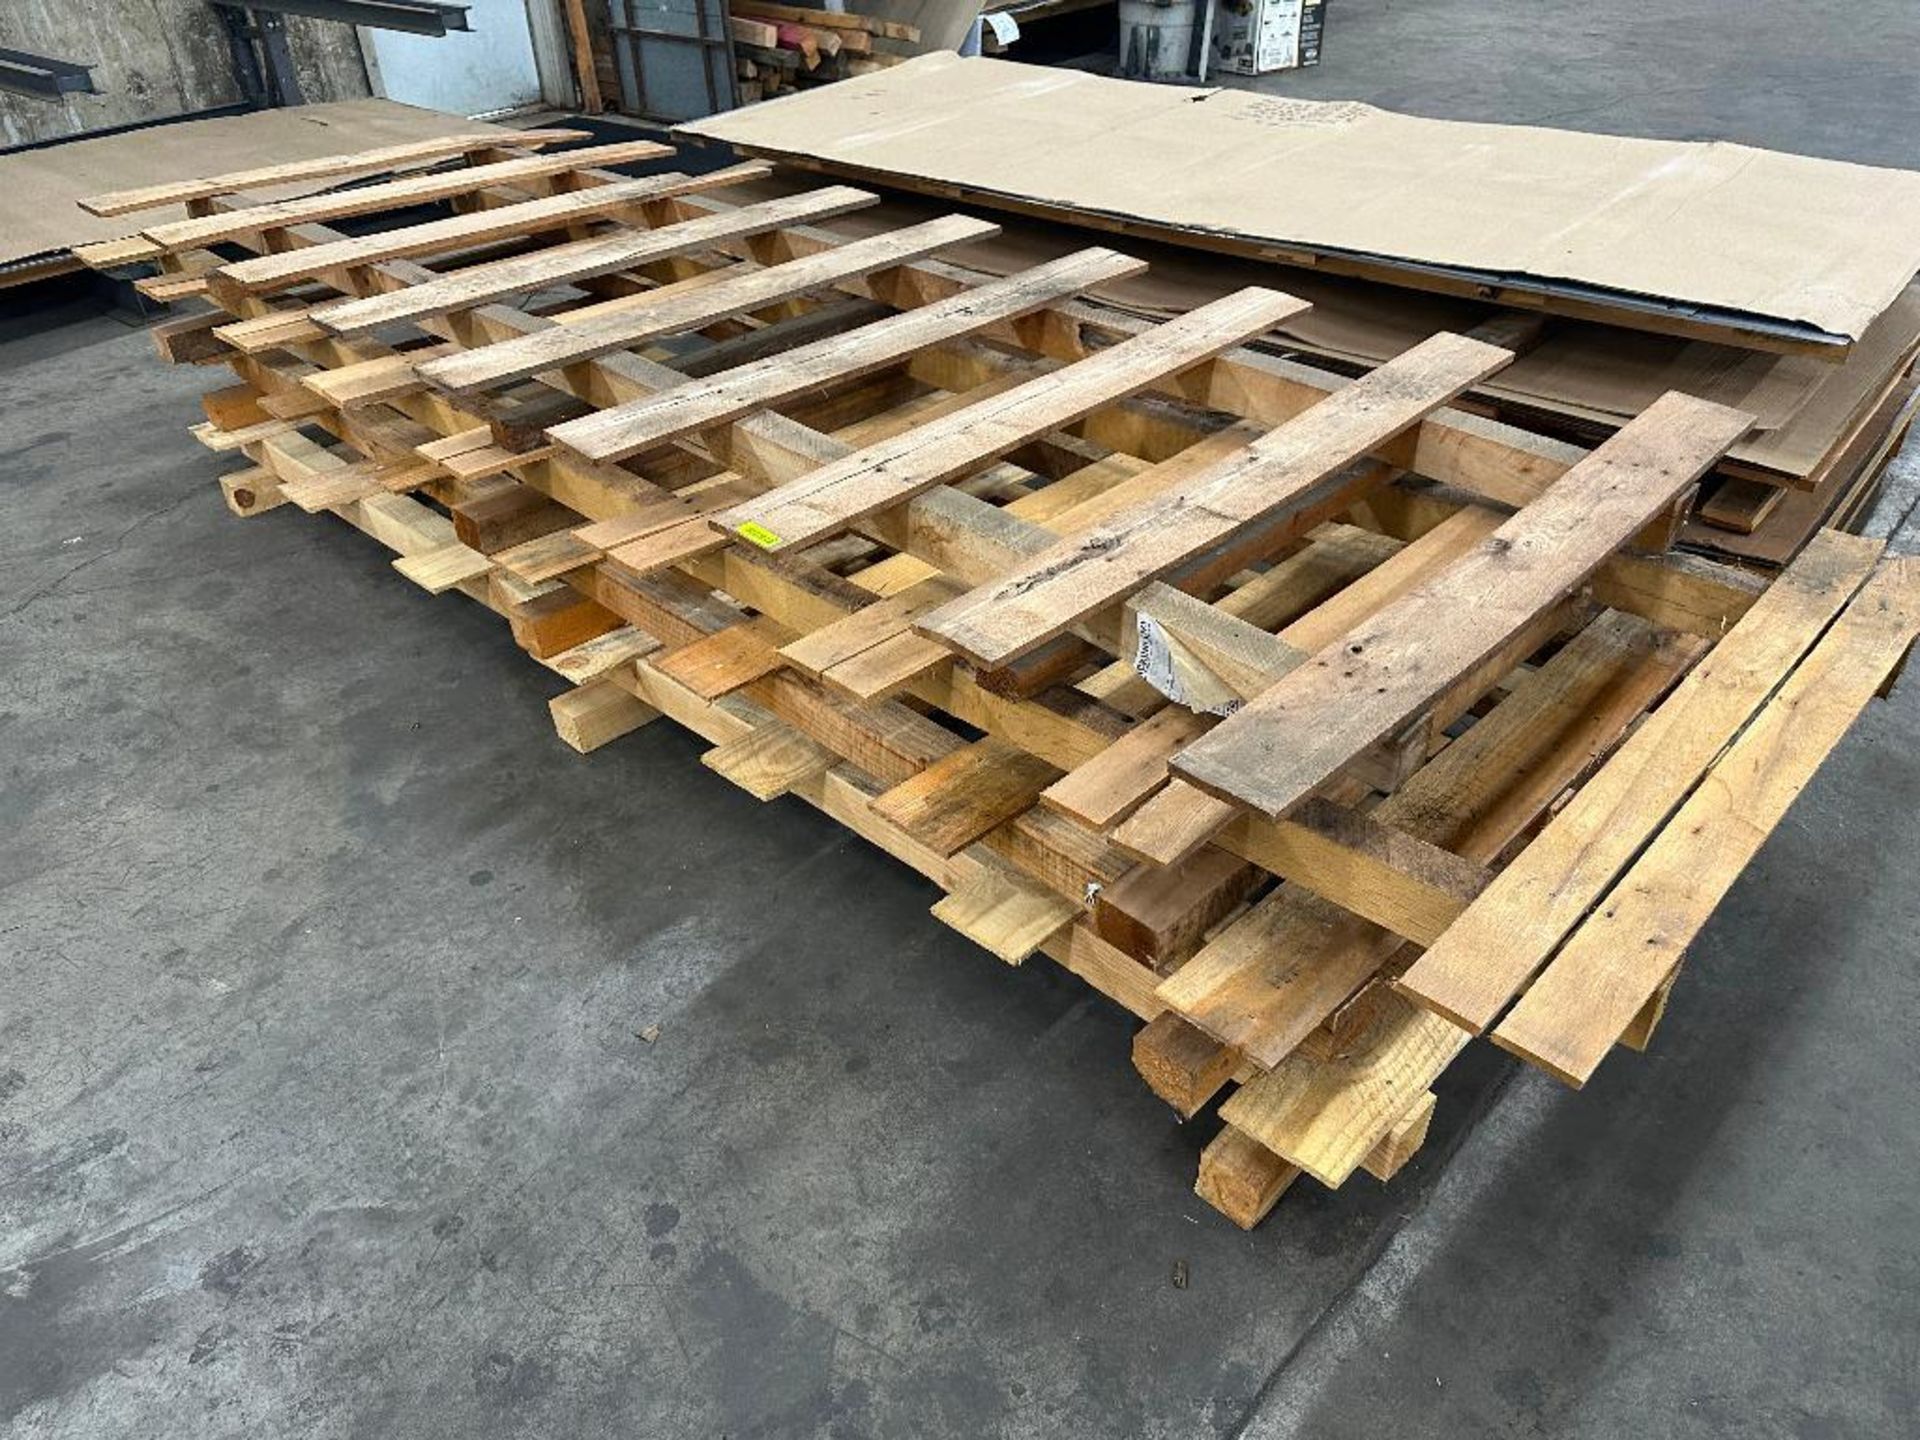 (4) PIECES WOODEN SHIPPING PALLETS